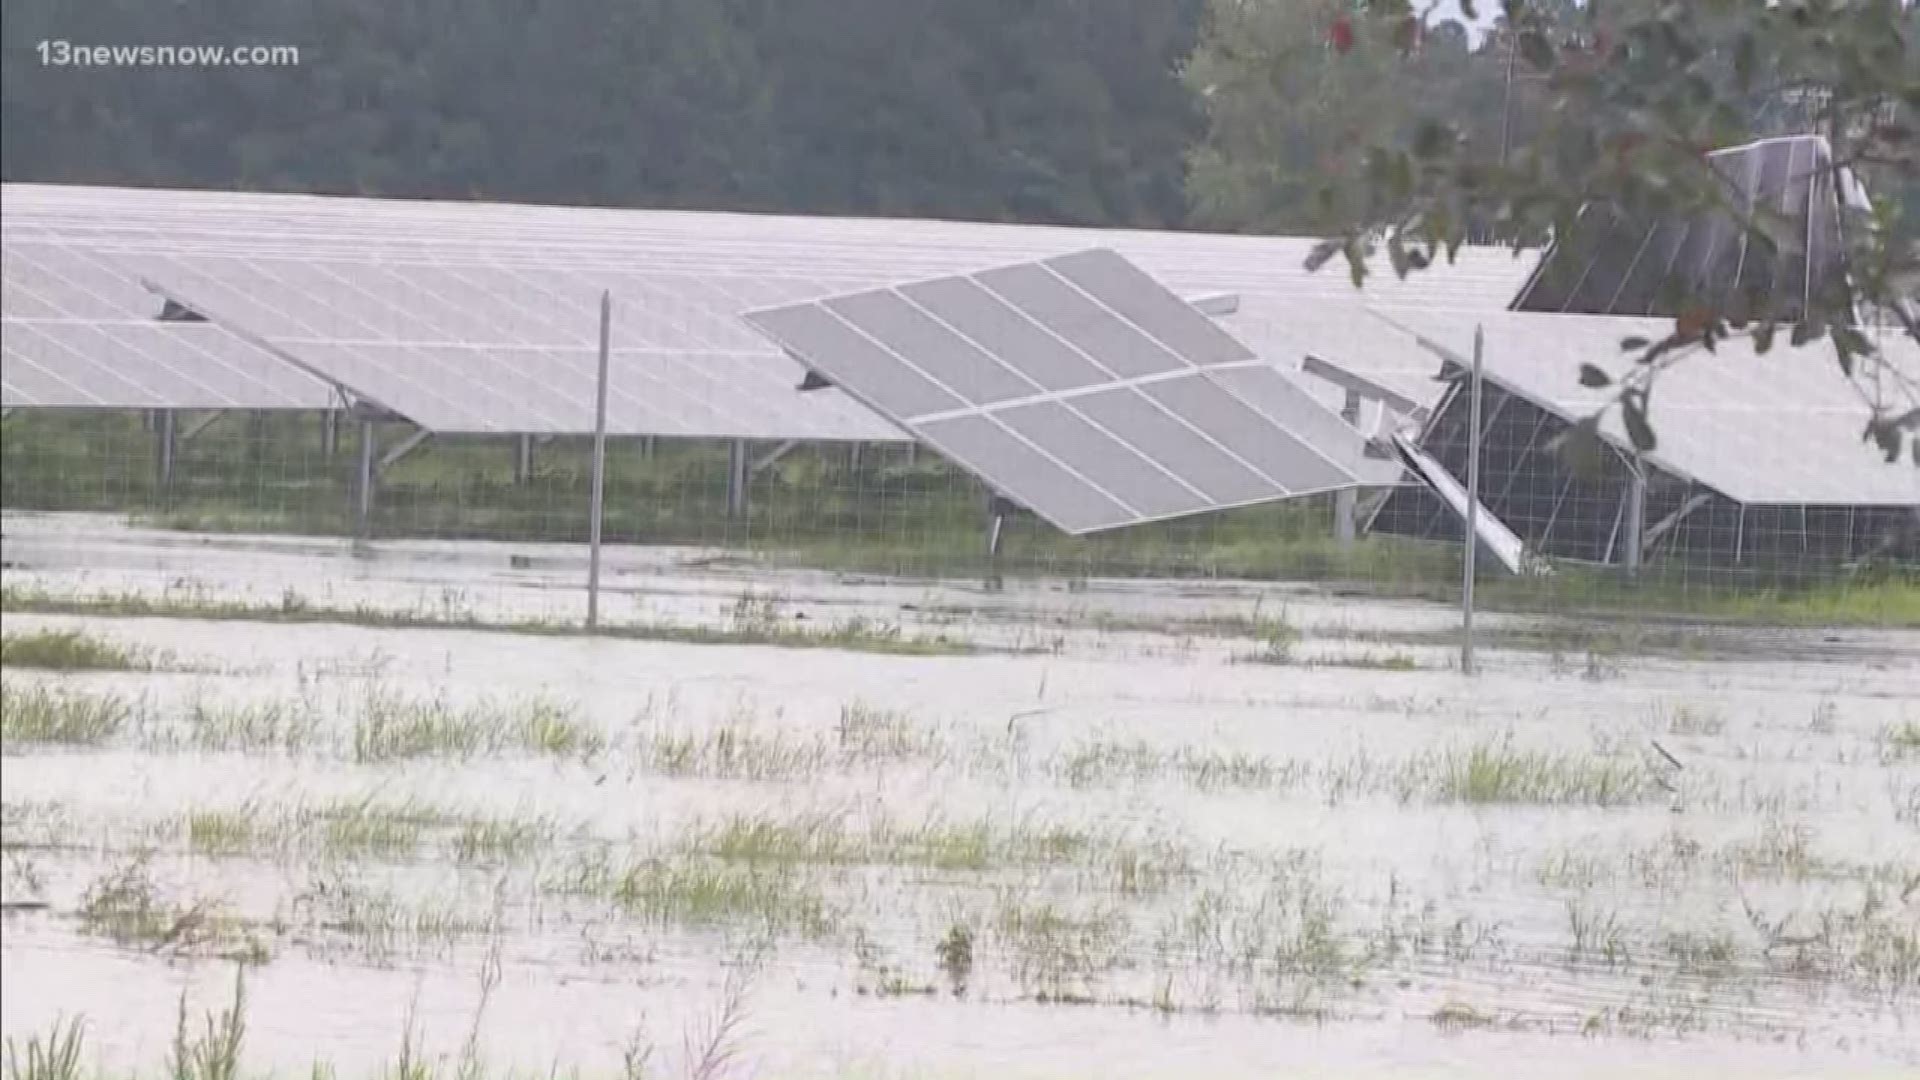 A just-completed solar panel farm in the Grandy area of Currituck County was damaged by the floodwater and wind of Hurricane Dorian.